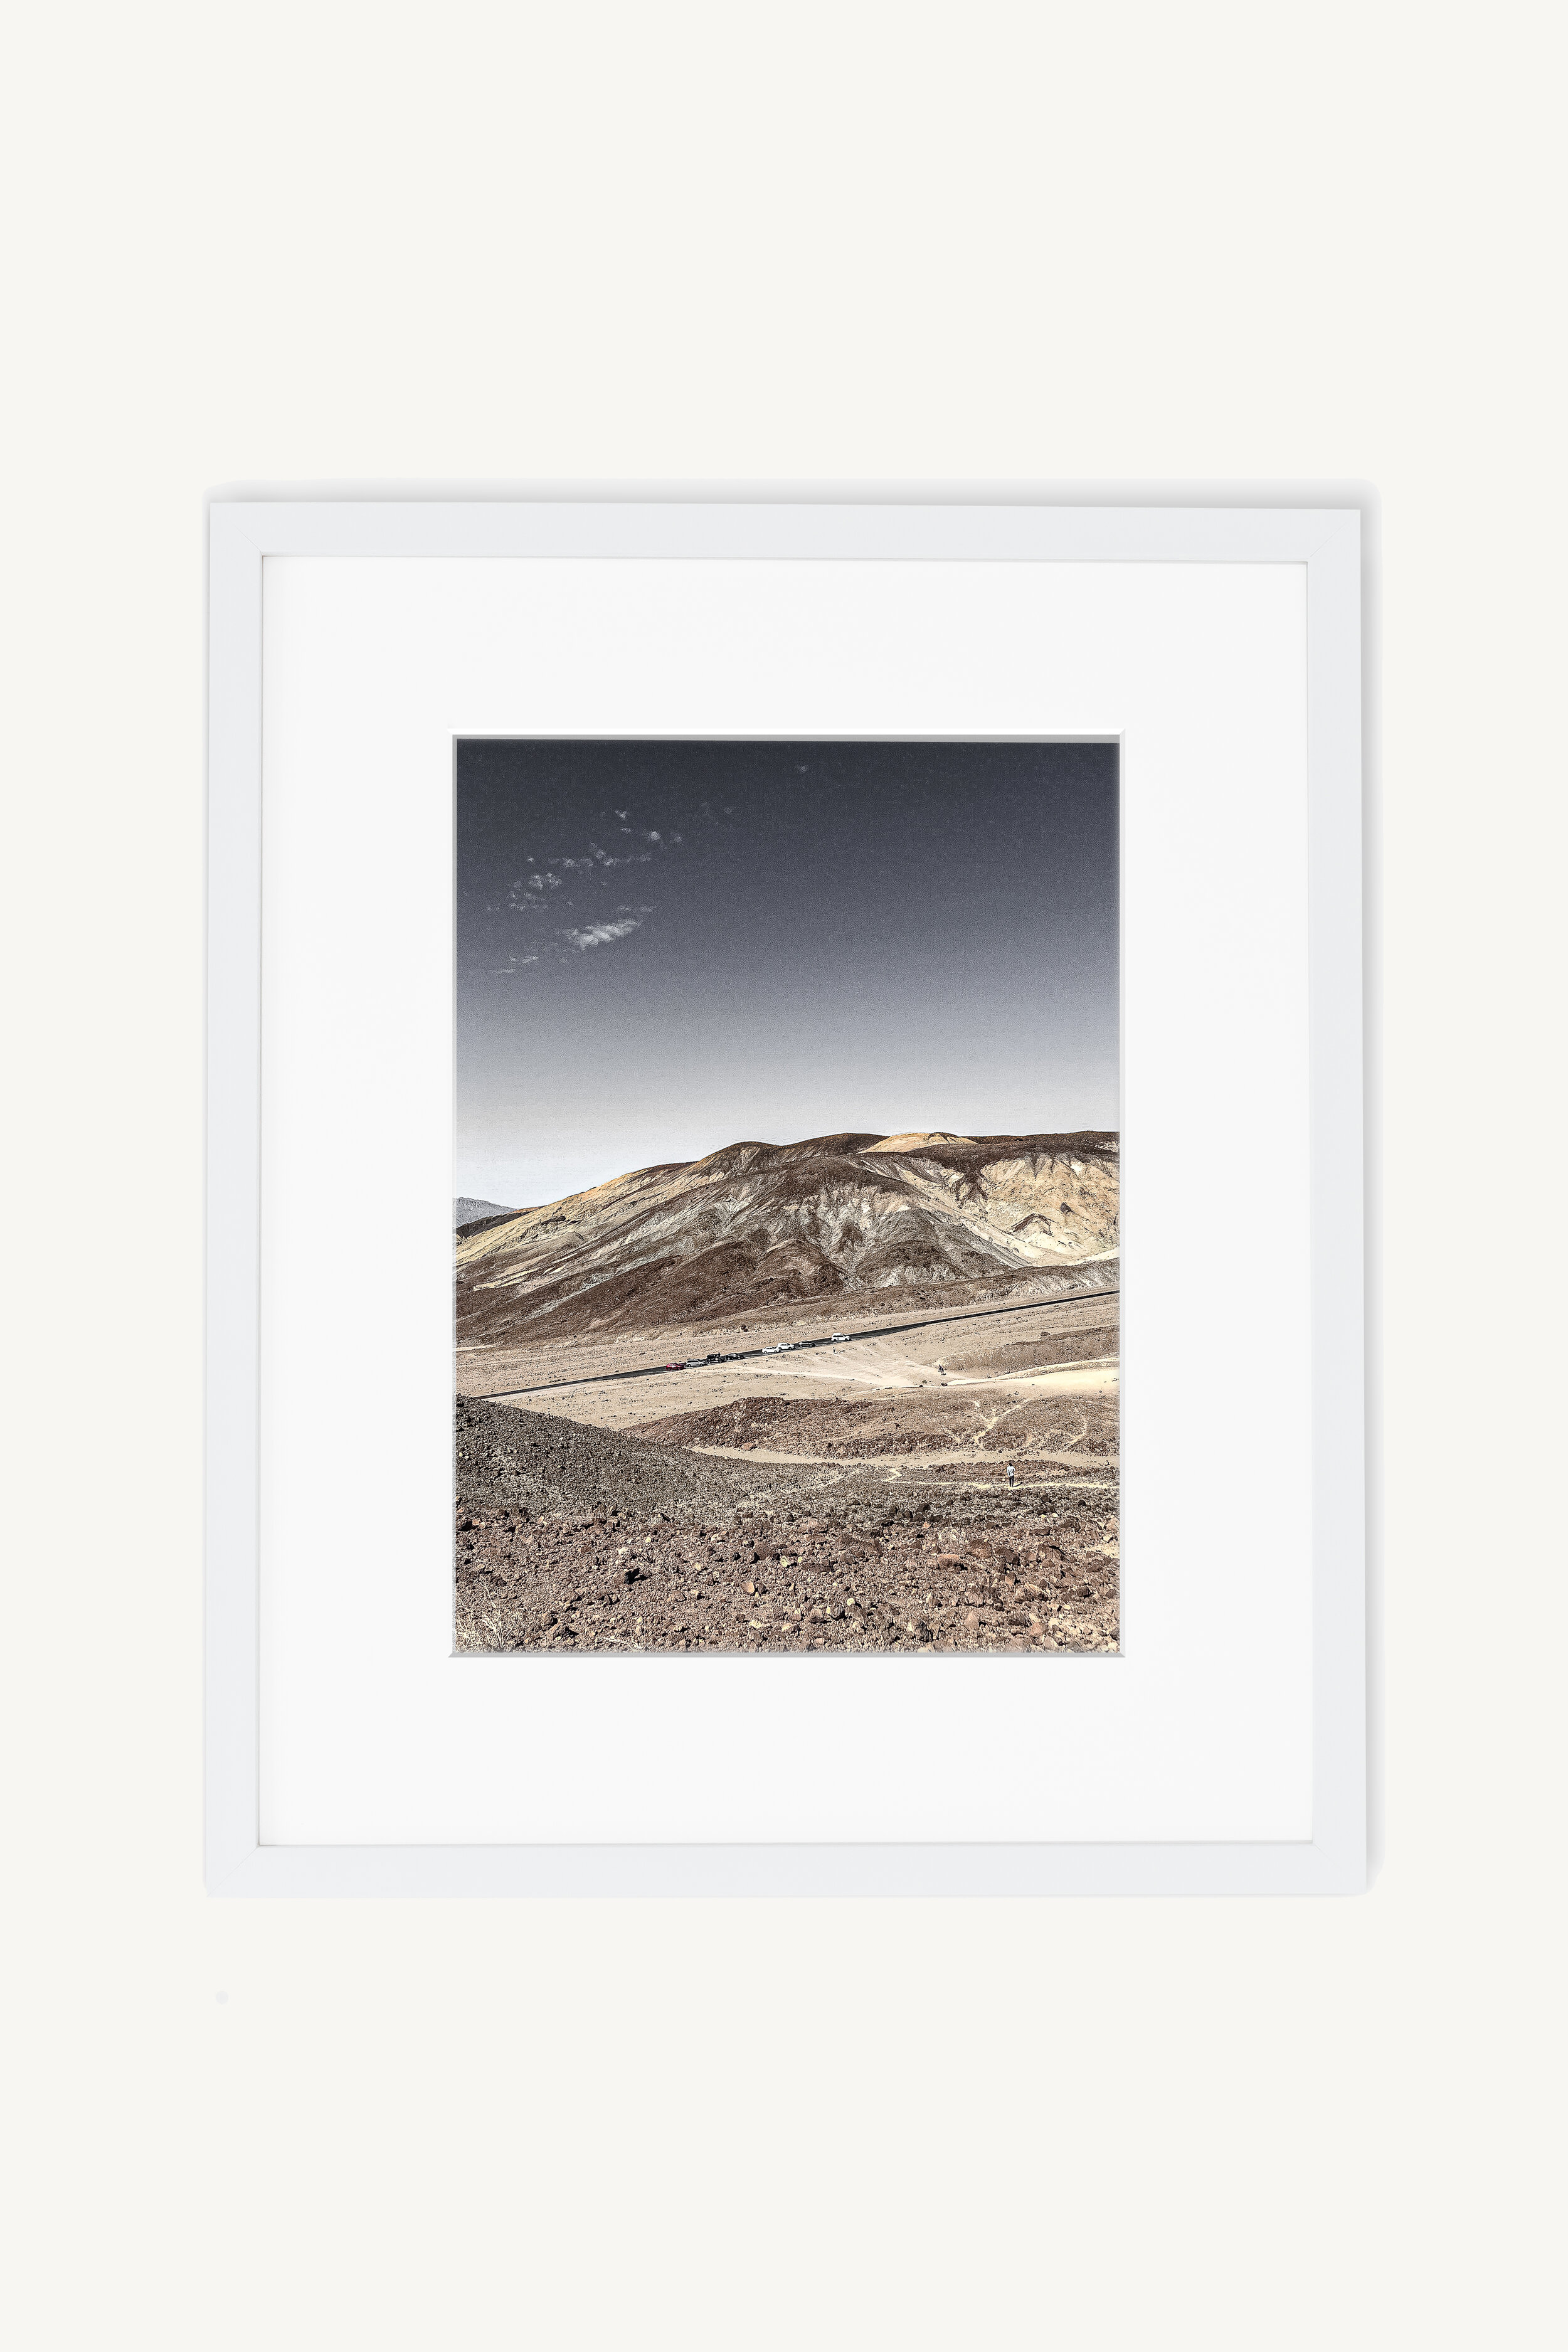 Death Valley National Prints BADWATER Framed | PRINTS Park Print — Badwater